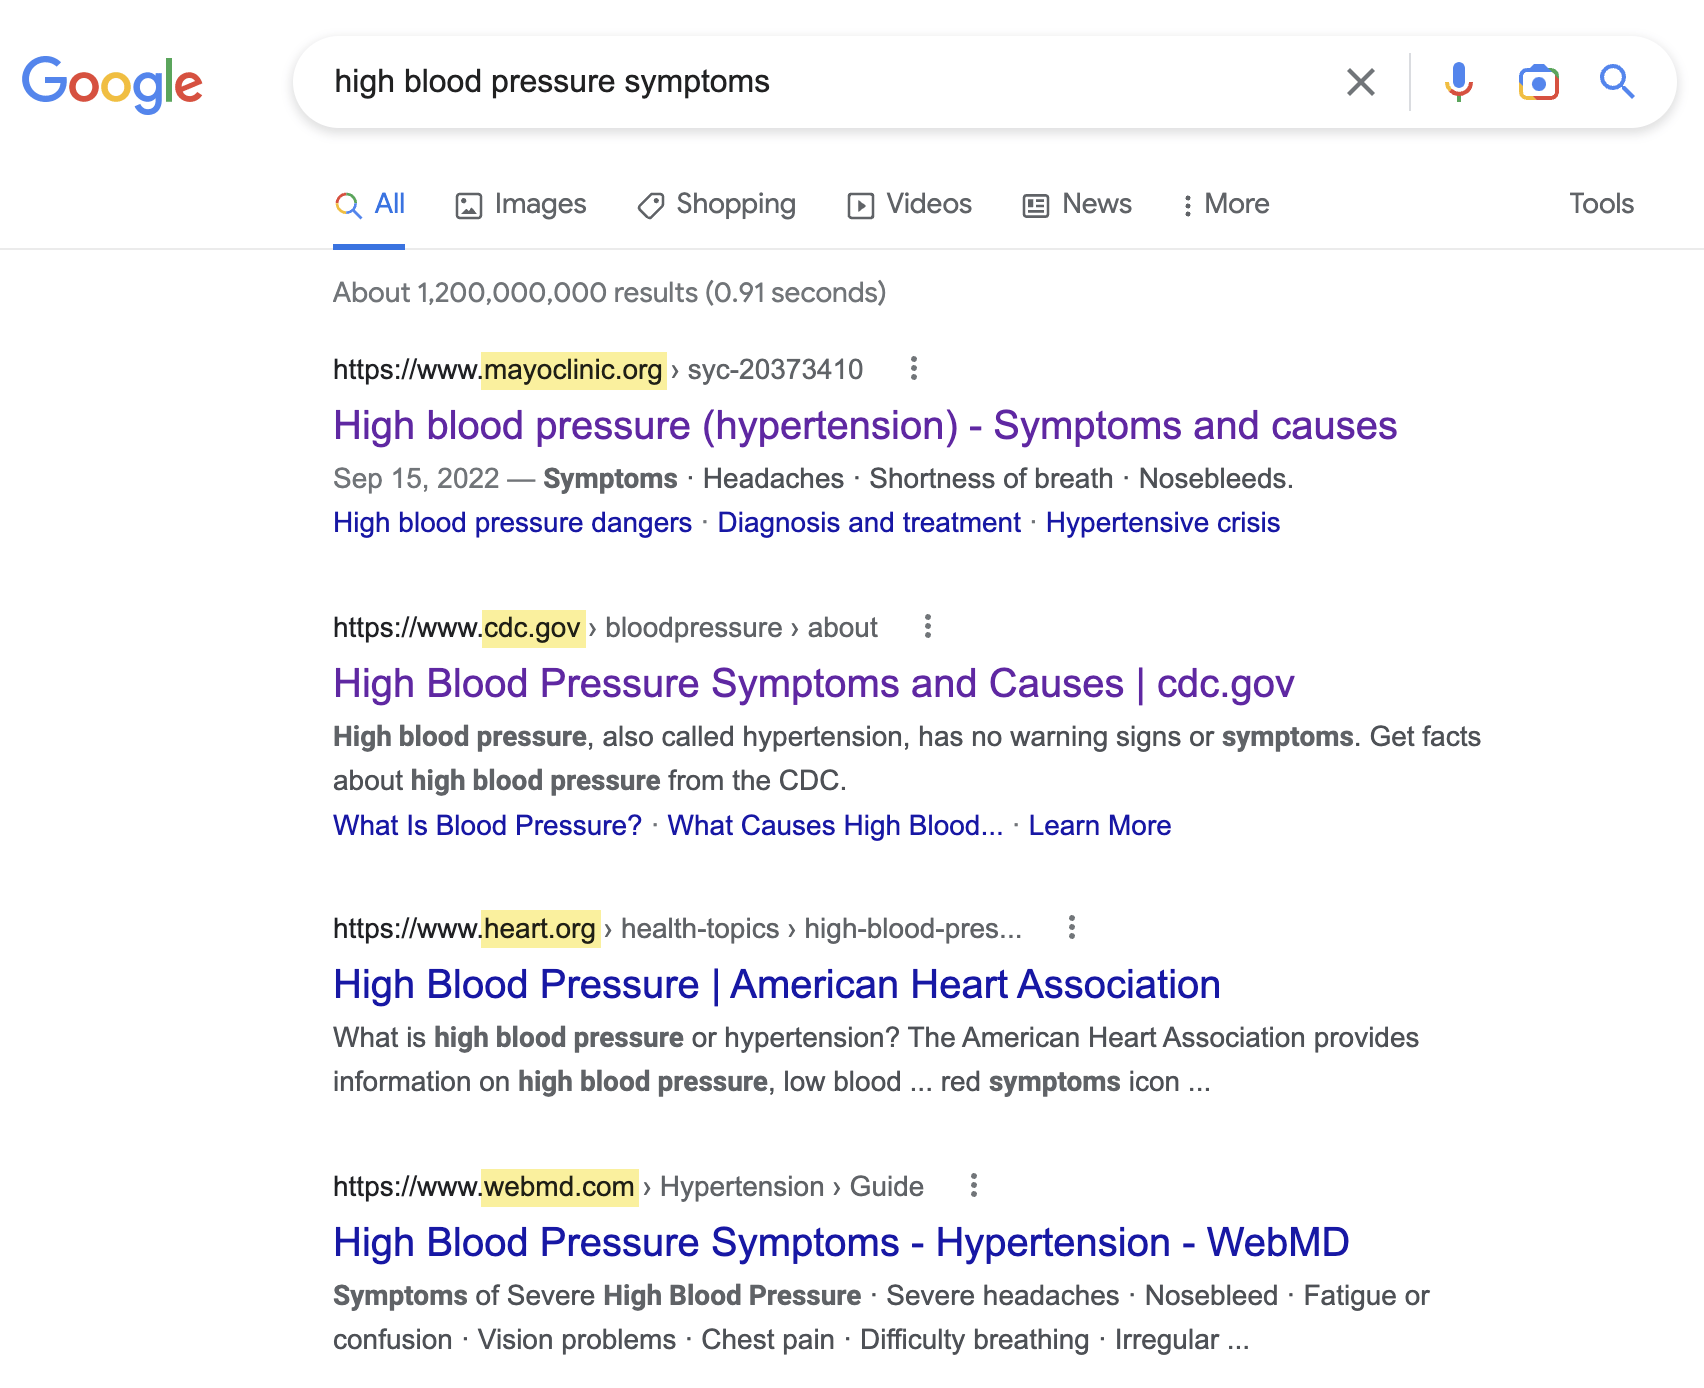 Search results for "high blood pressure symptoms" are all from big brands and government organizations